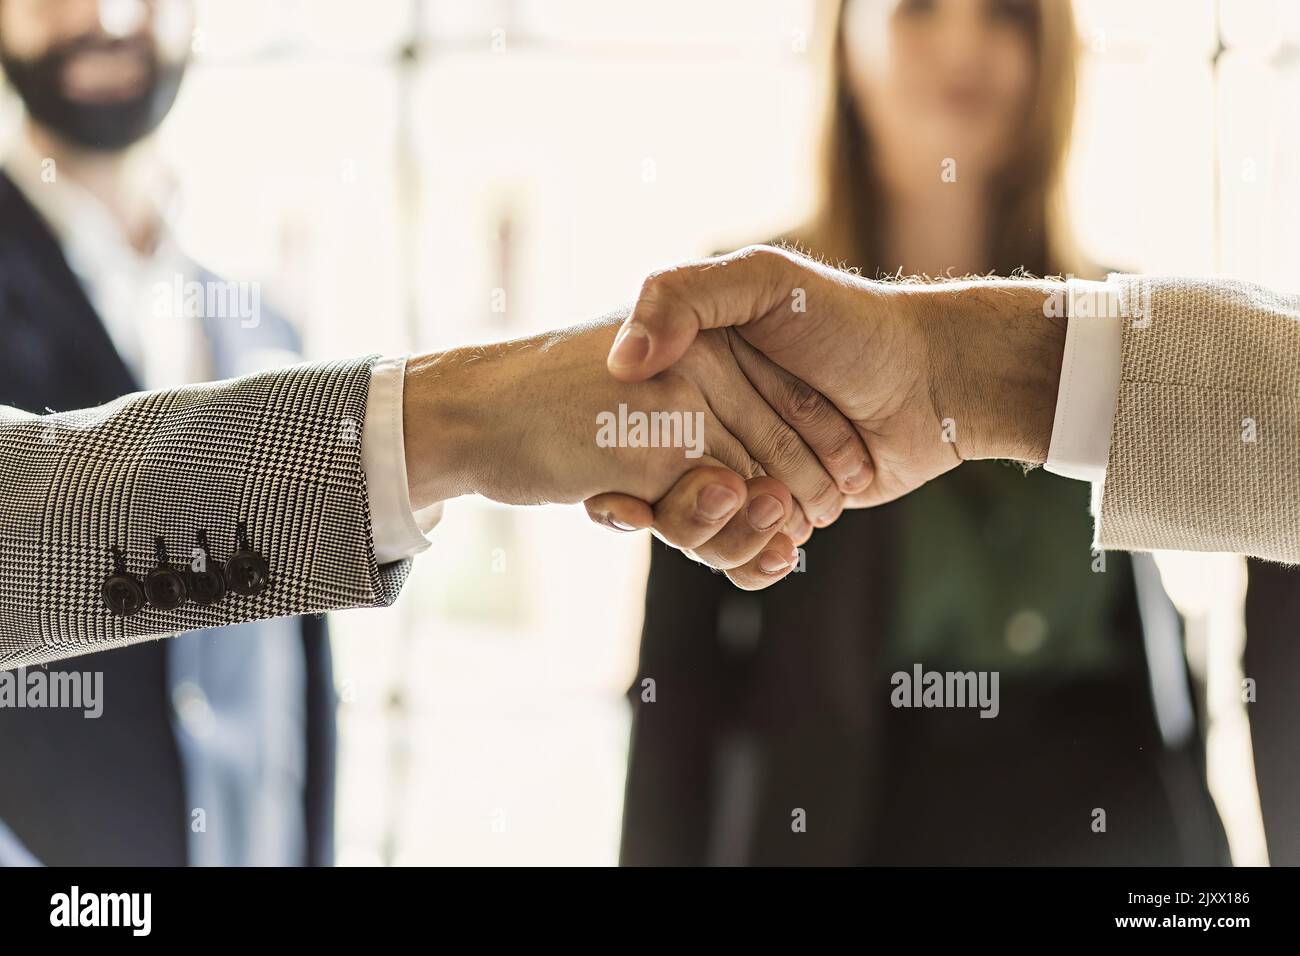 Crop shot of two hands shaking celebrating a business agreement - people blurred in the background - business lifestyle concept Stock Photo